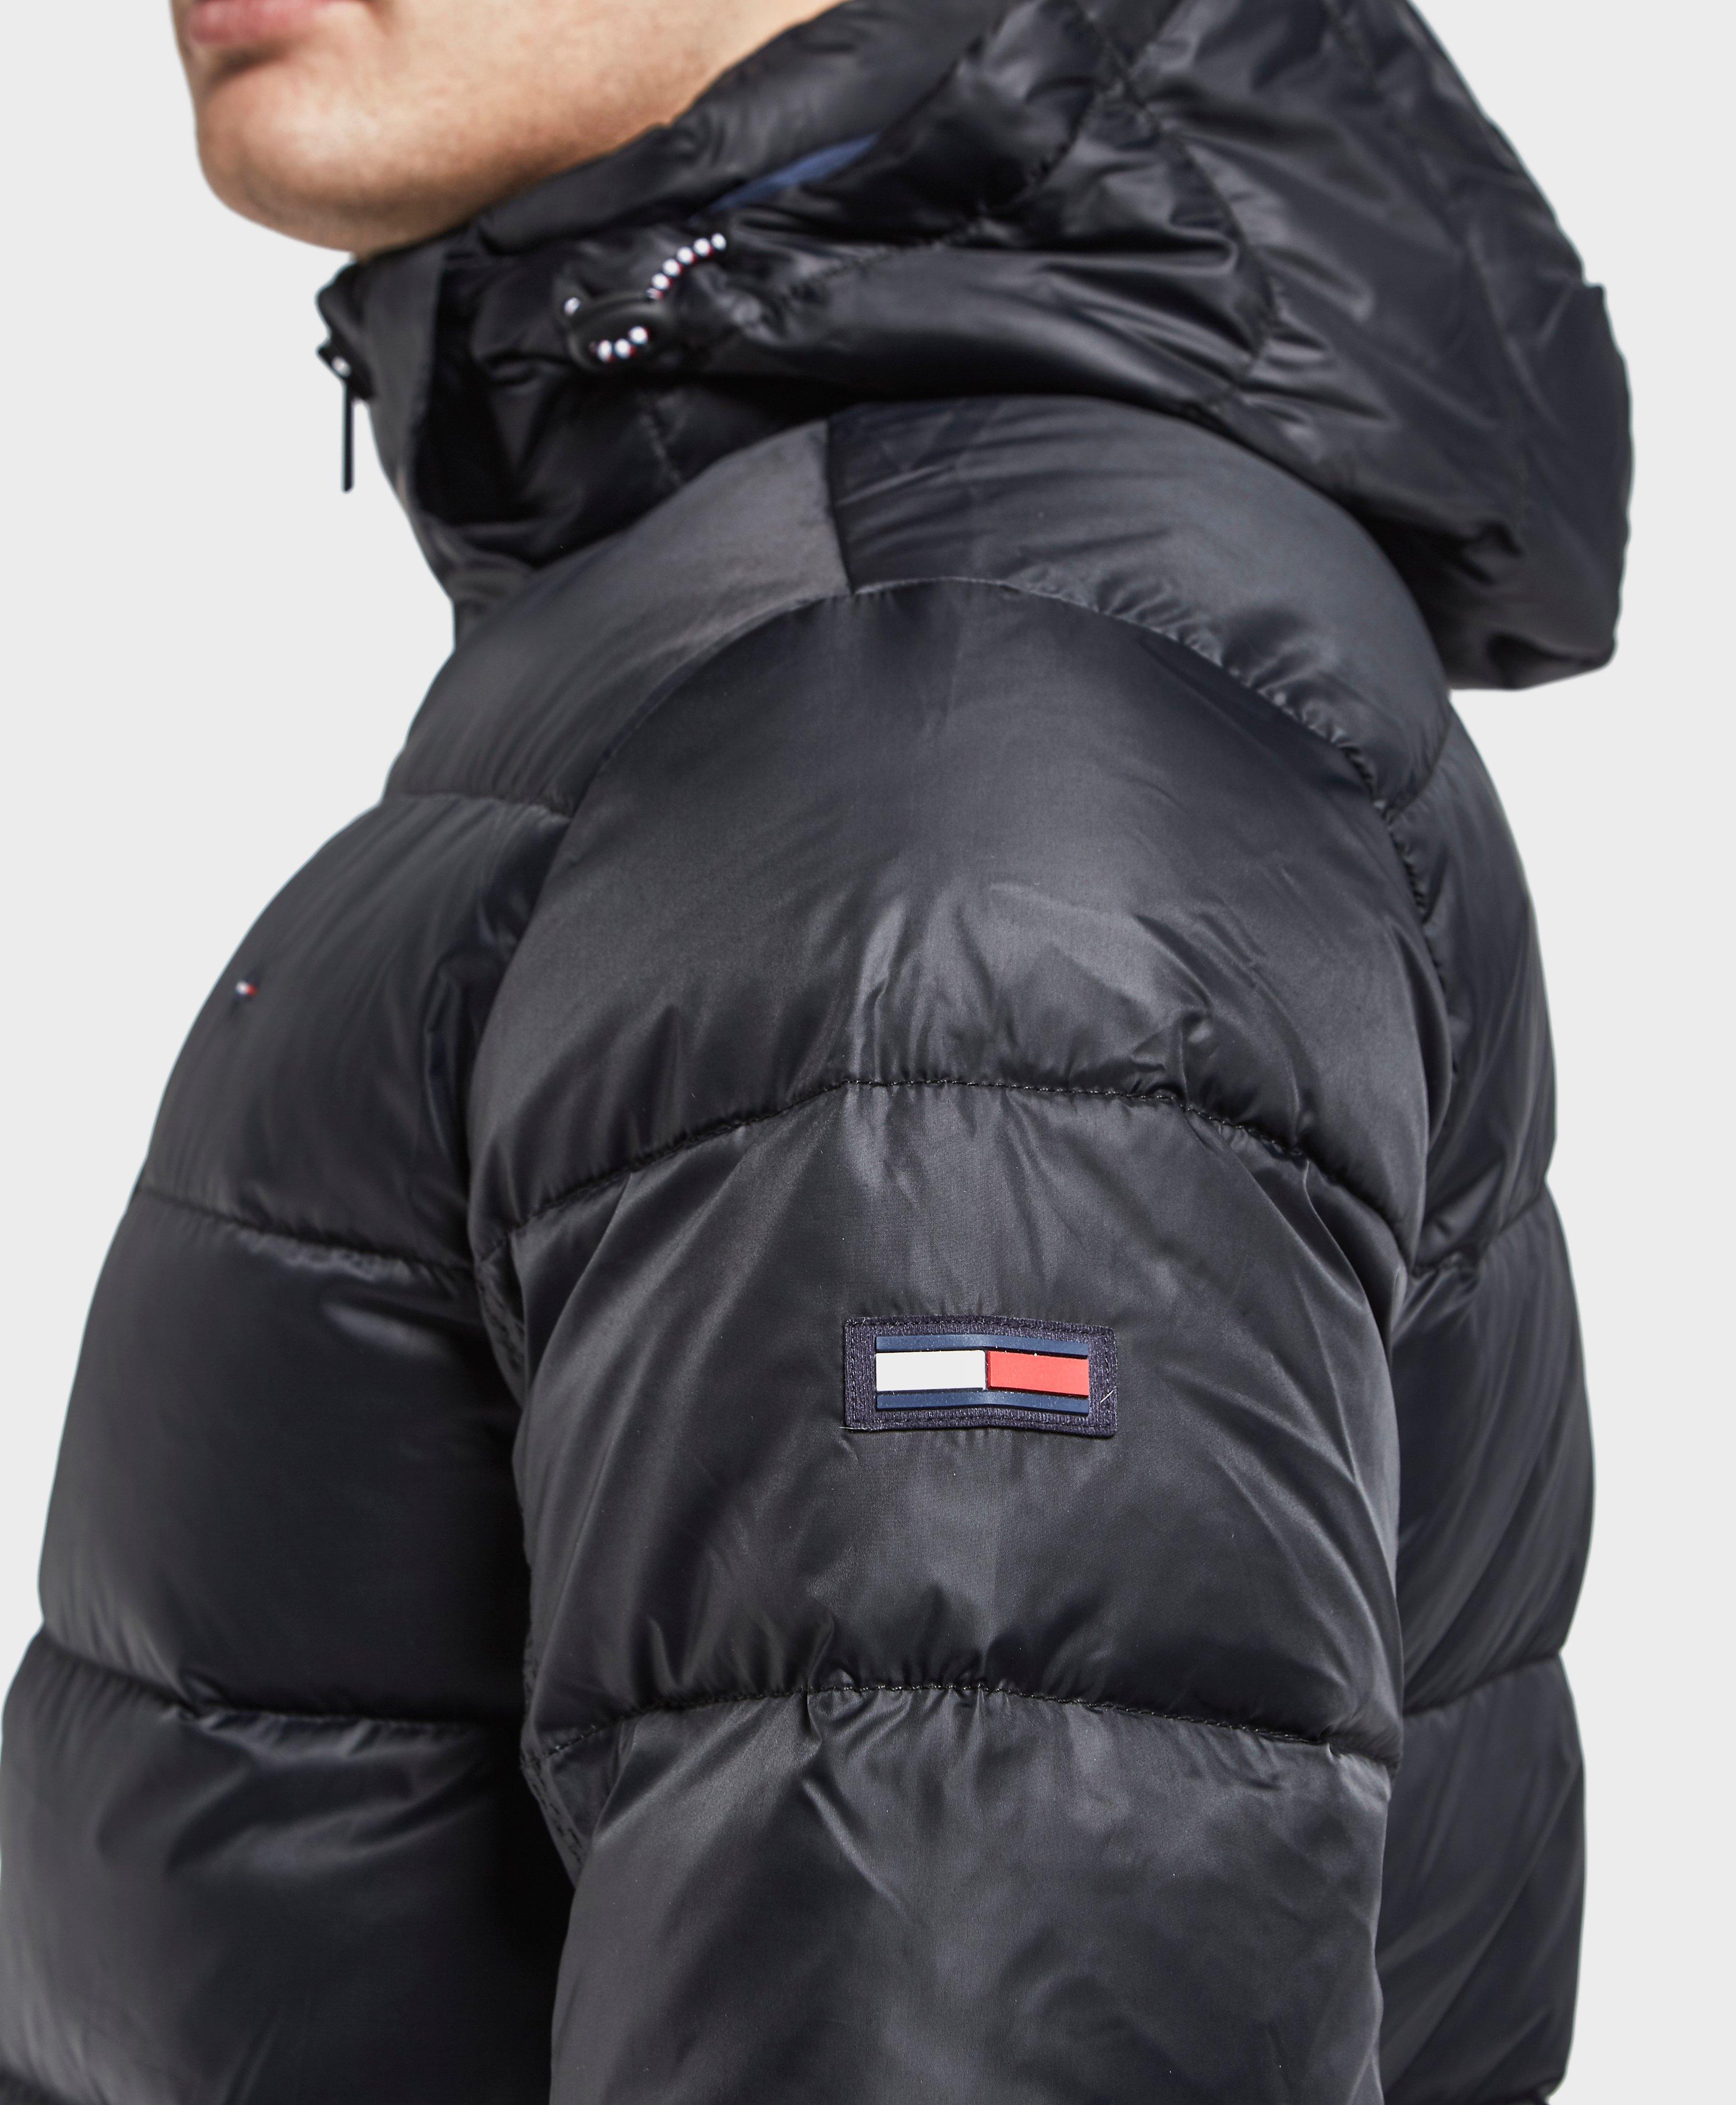 Tommy Hilfiger Synthetic Down Padded Jacket in Black for Men - Lyst